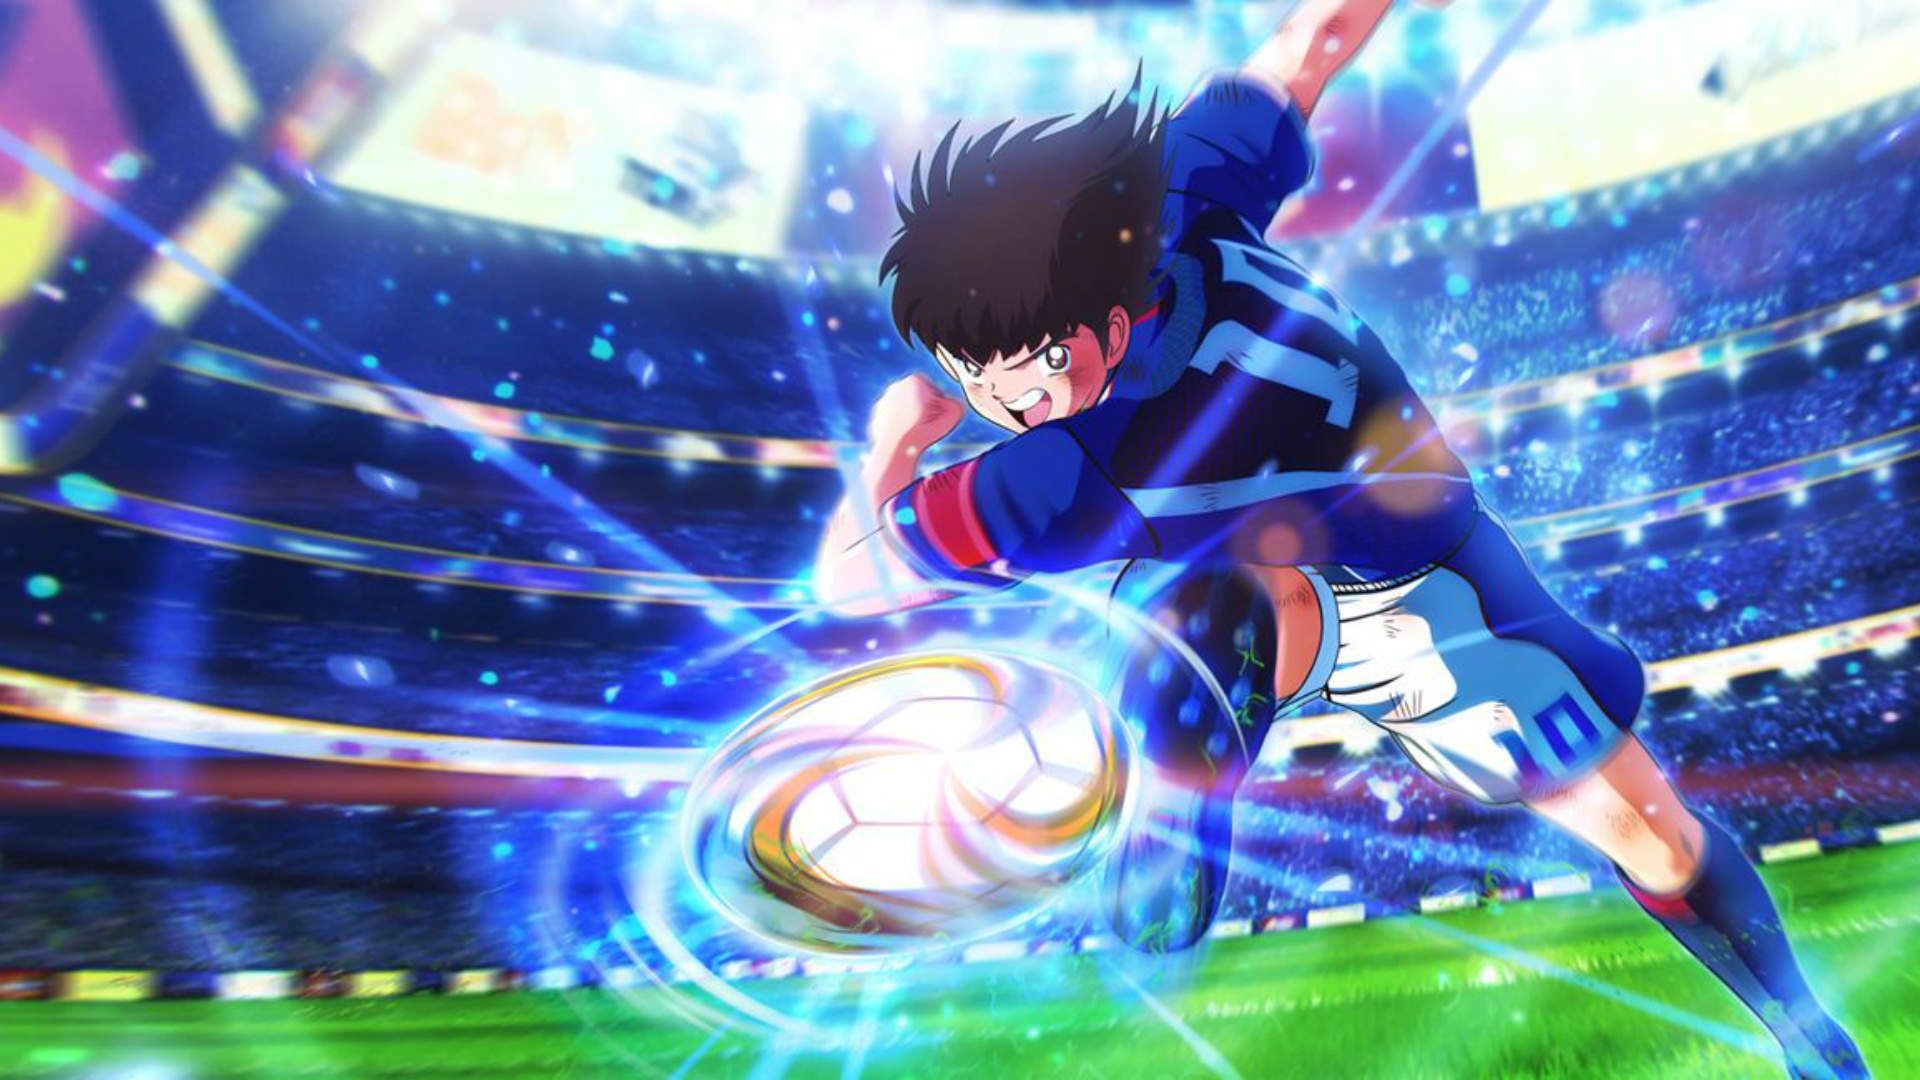 Captain Tsubasa Giving FIFA Much Needed Competition With Super Powered Shonen Soccer